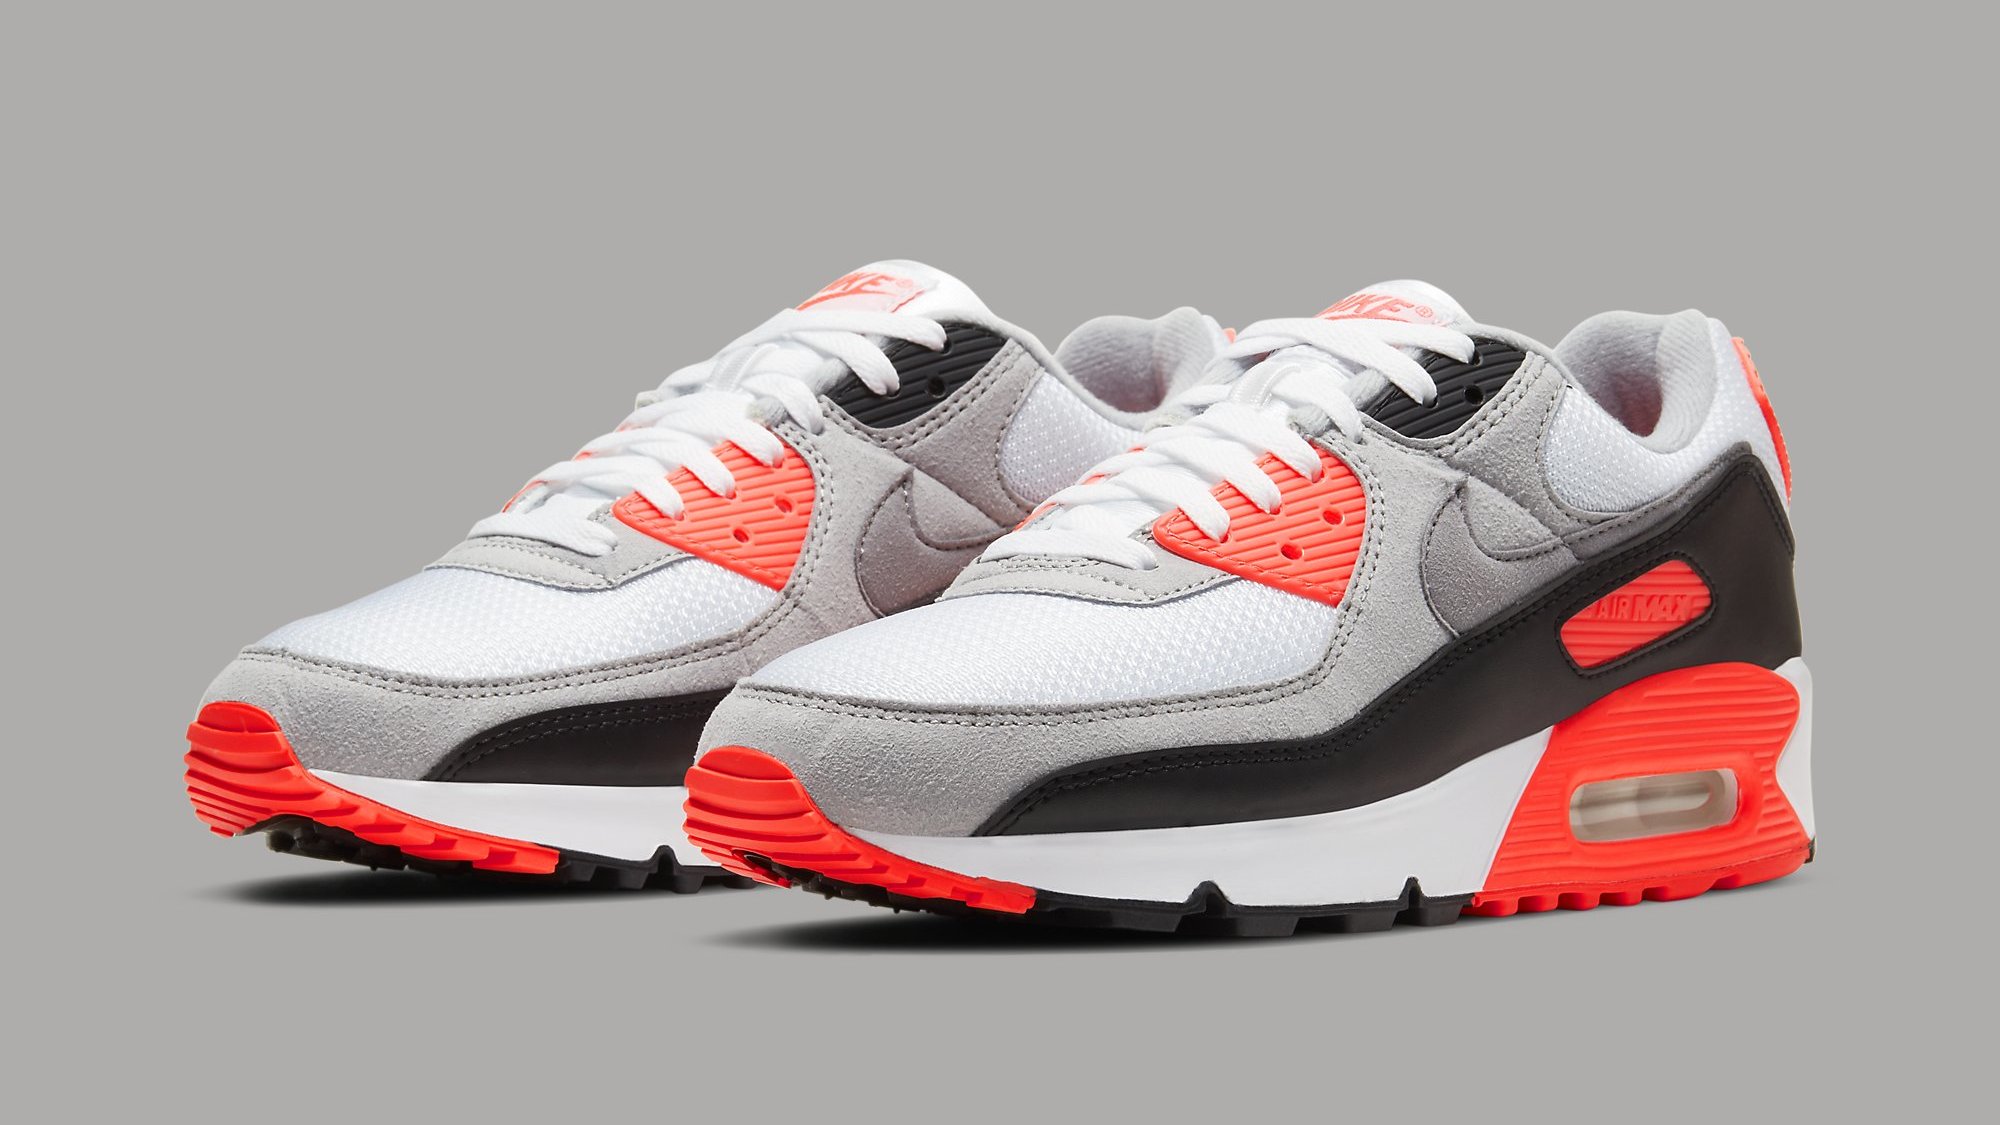 Nike Air Max 90 OG 'Infrared' Radiant Red CT1685 100 Release Date